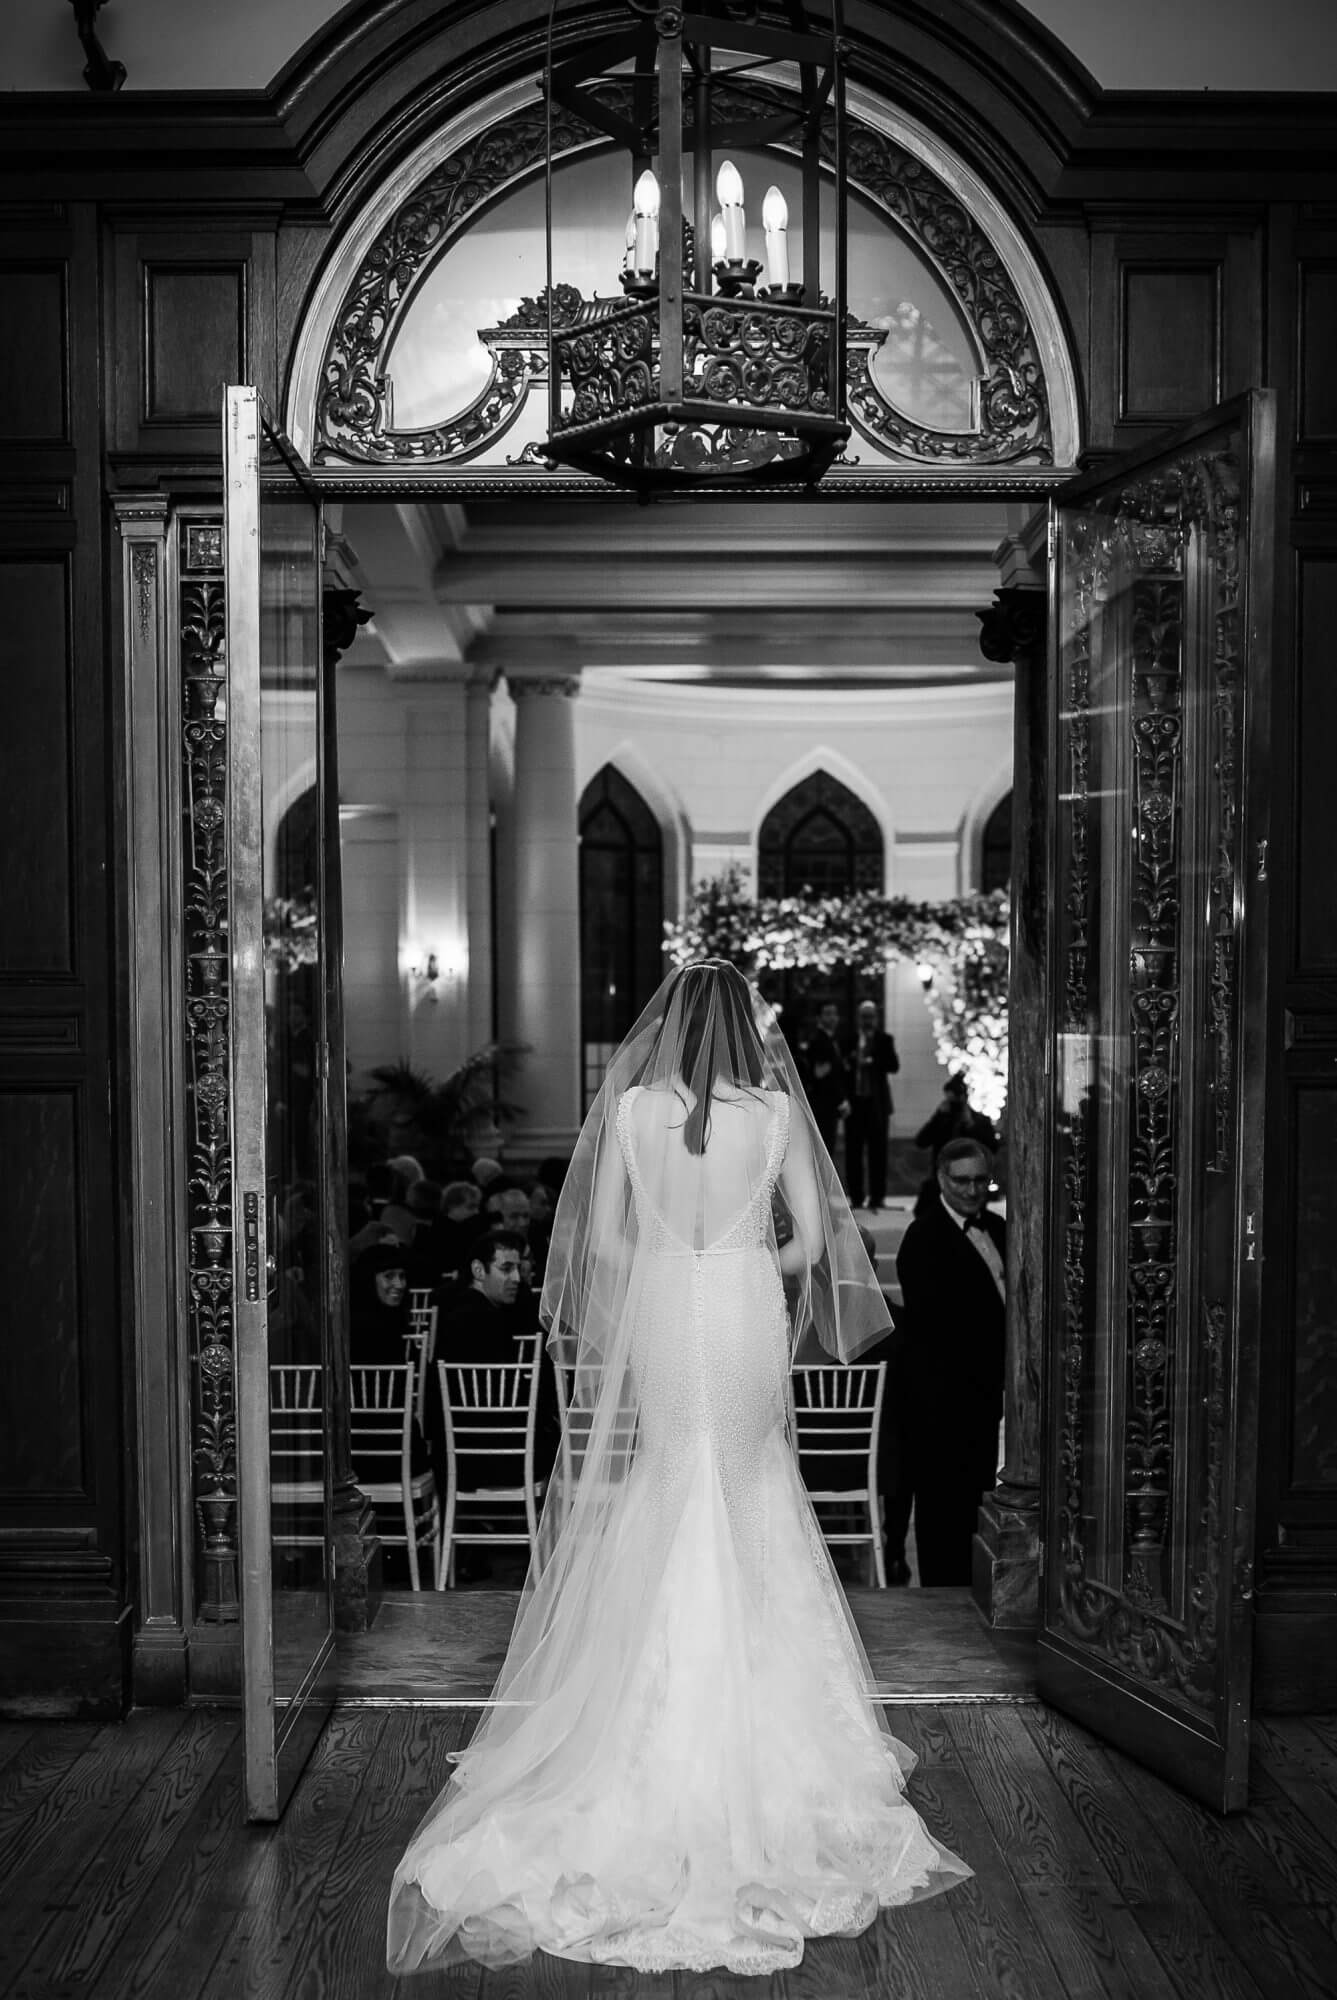 Black and White portrait of the Bride about to go down the aisle at Casa Loma in Toronto